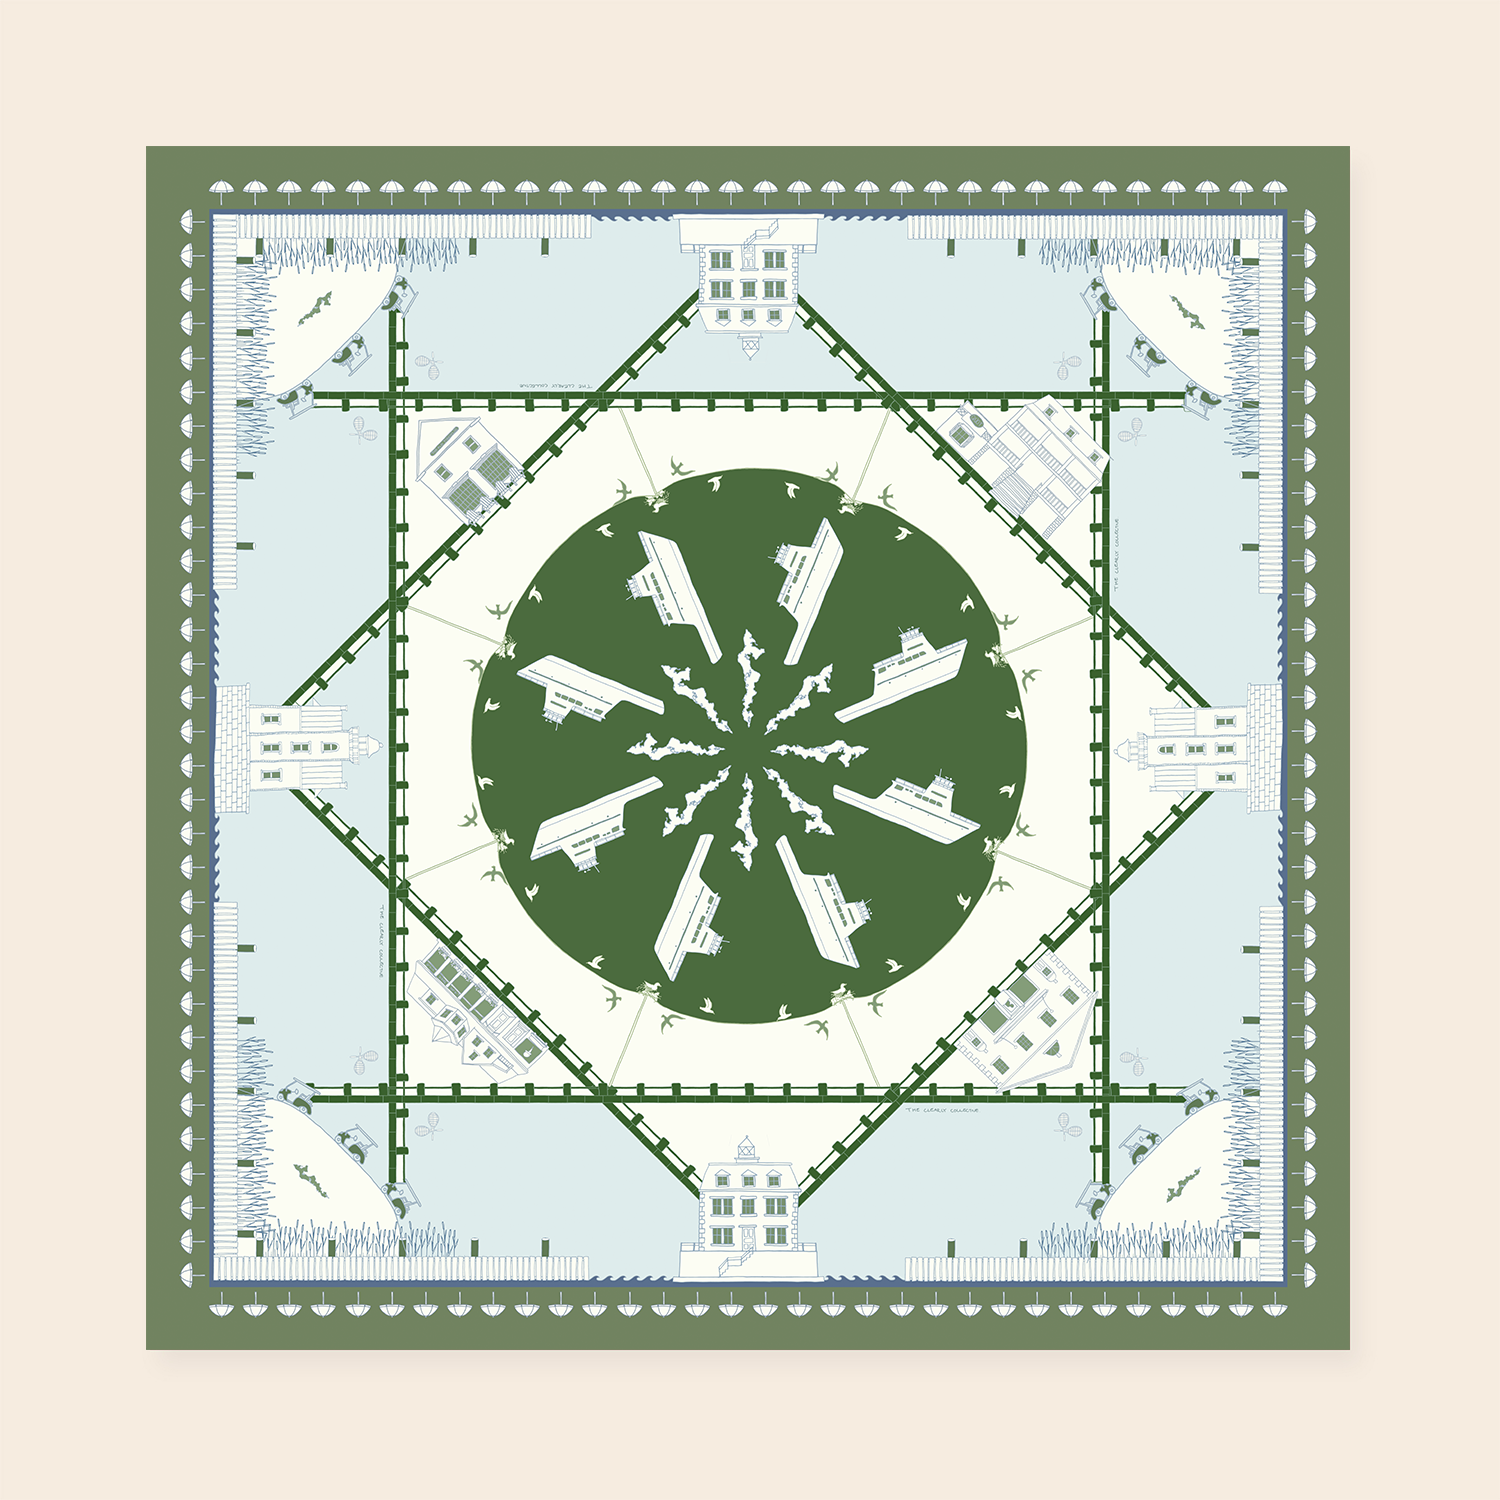 XMAS PREORDER: THE FISHERS ISLAND SCARF IN GREEN